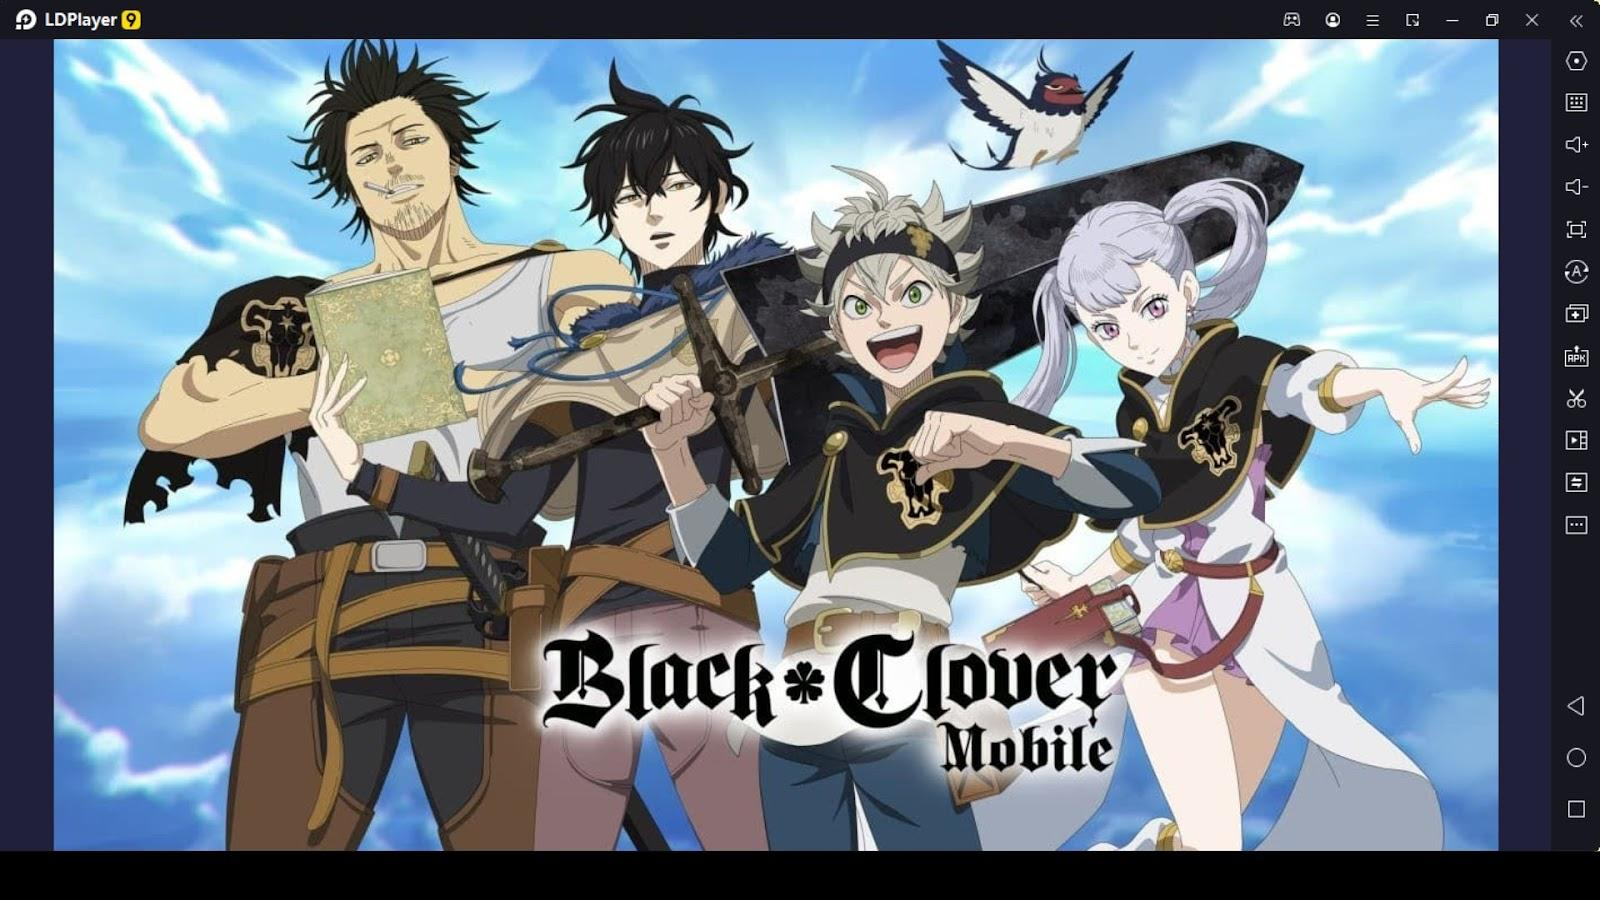 Black Clover Mobile Beginner Guide for Get Yourself Prepared-Game  Guides-LDPlayer